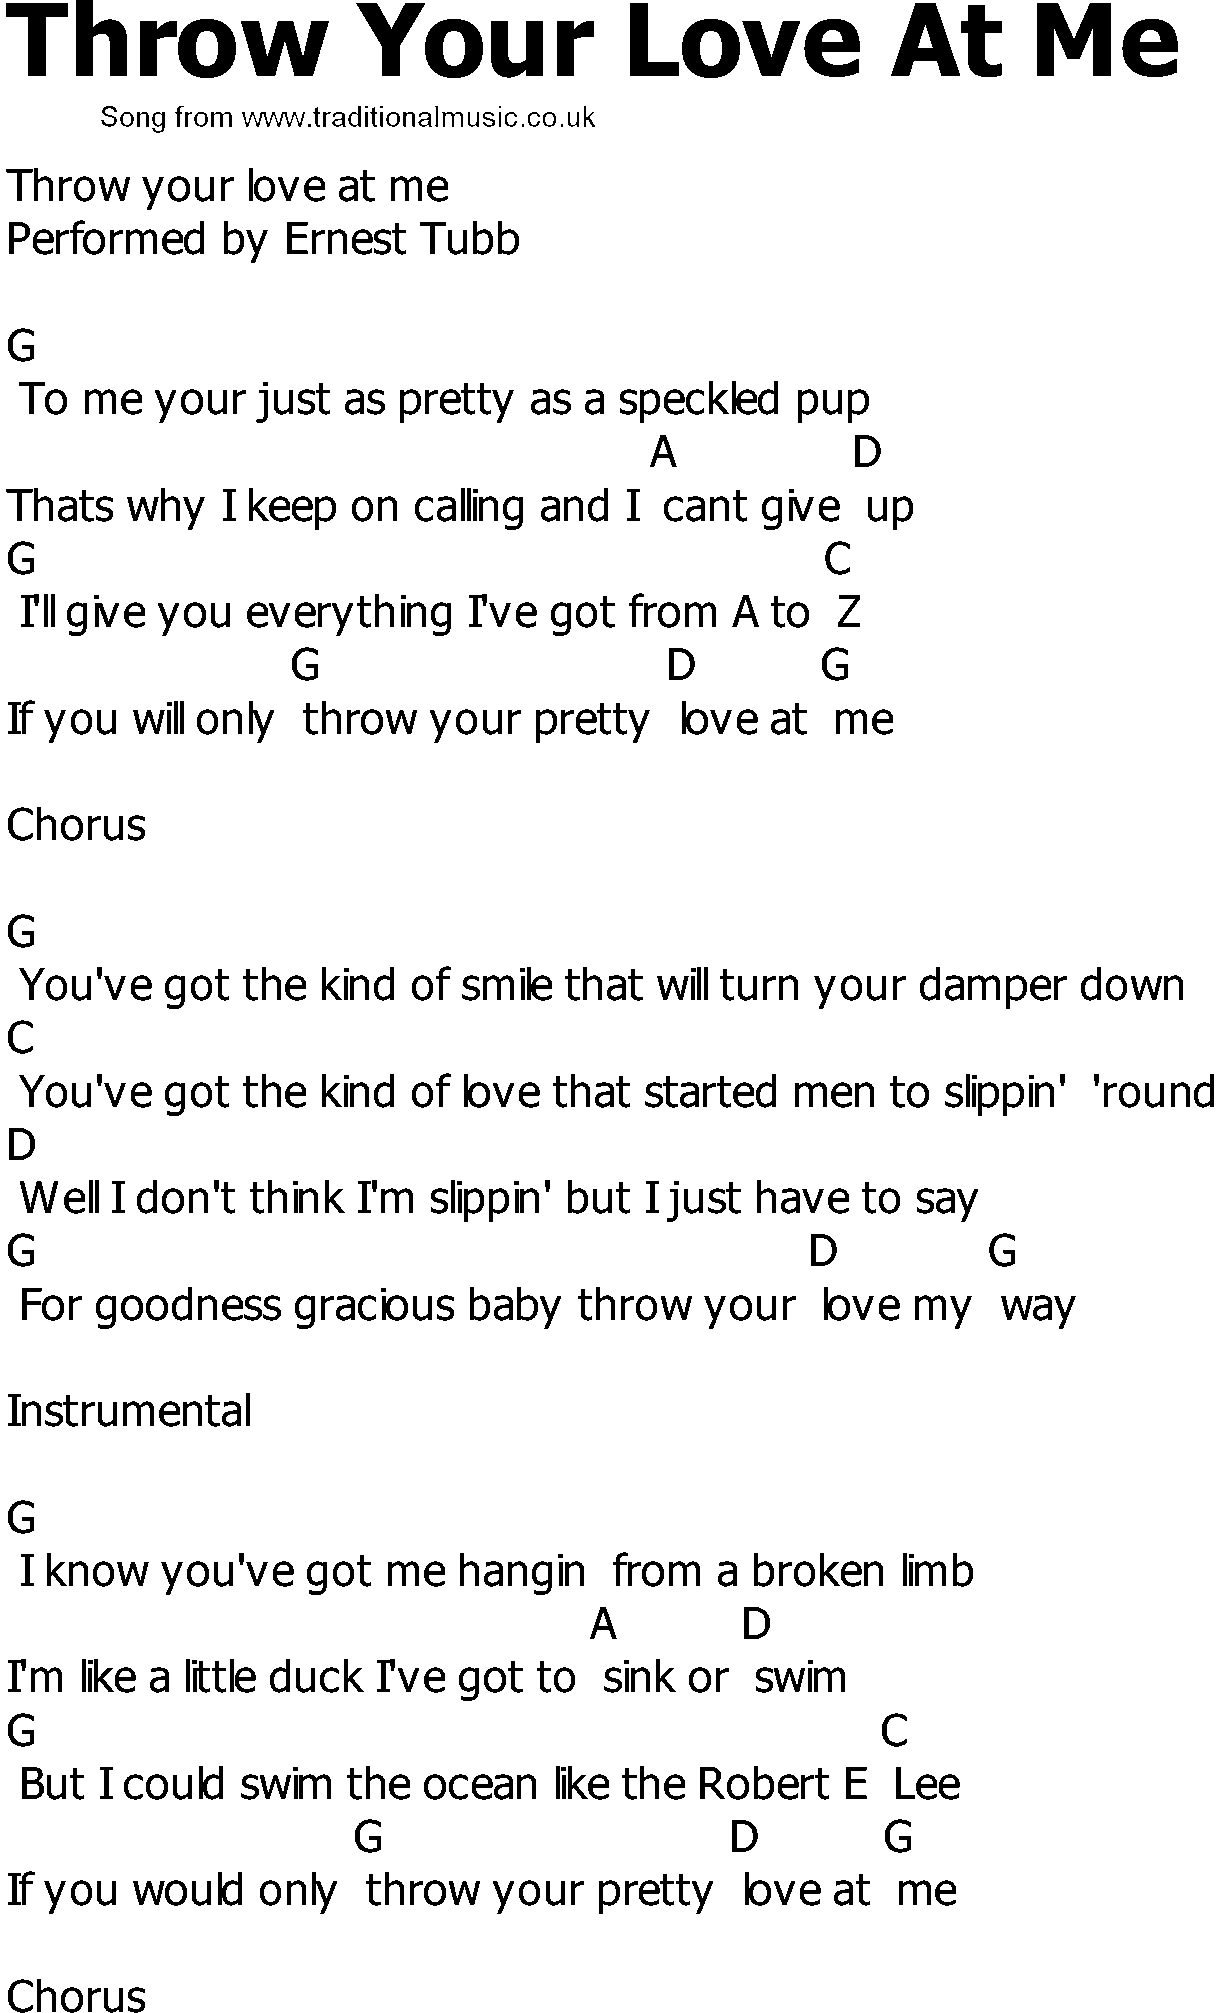 Old Country song lyrics with chords - Throw Your Love At Me